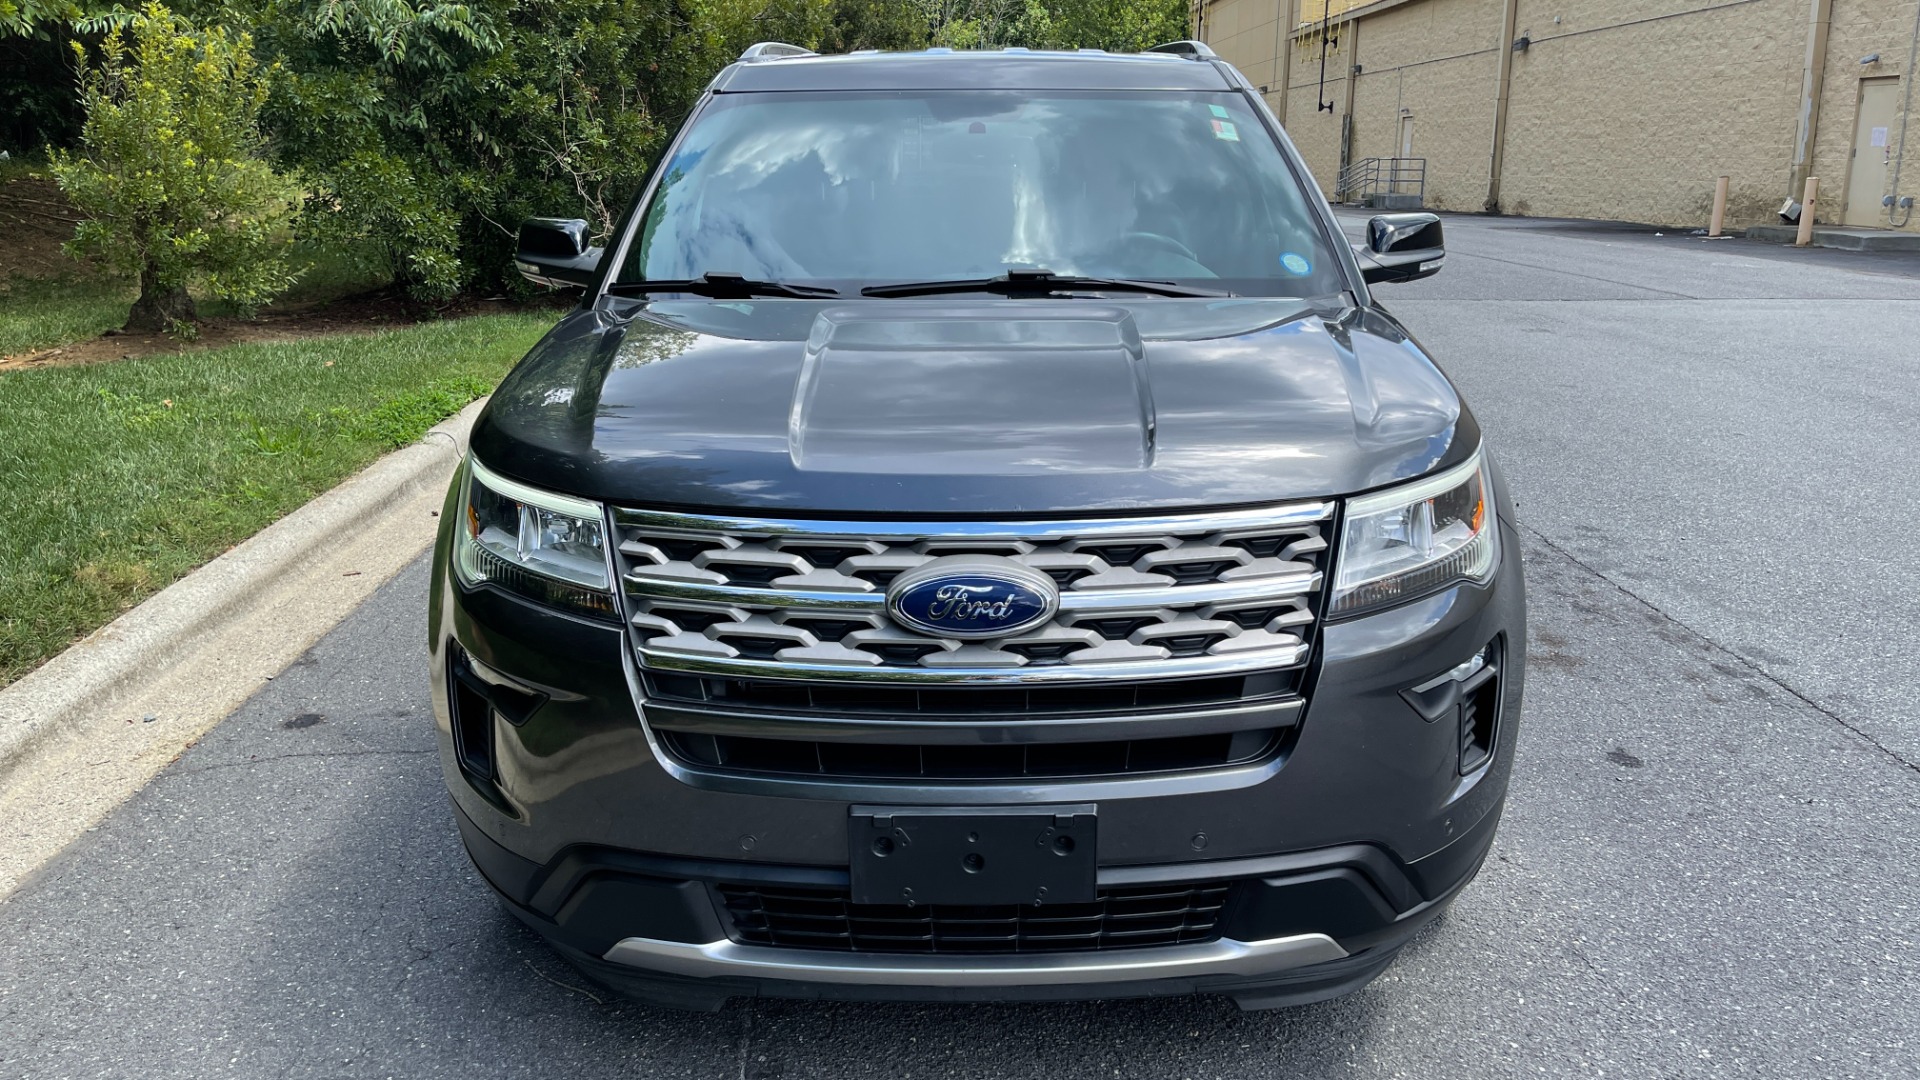 Used 2018 Ford Explorer XLT / REMOTE START / LEATHER / 3RD ROW / 20IN WHEELS for sale $31,495 at Formula Imports in Charlotte NC 28227 3